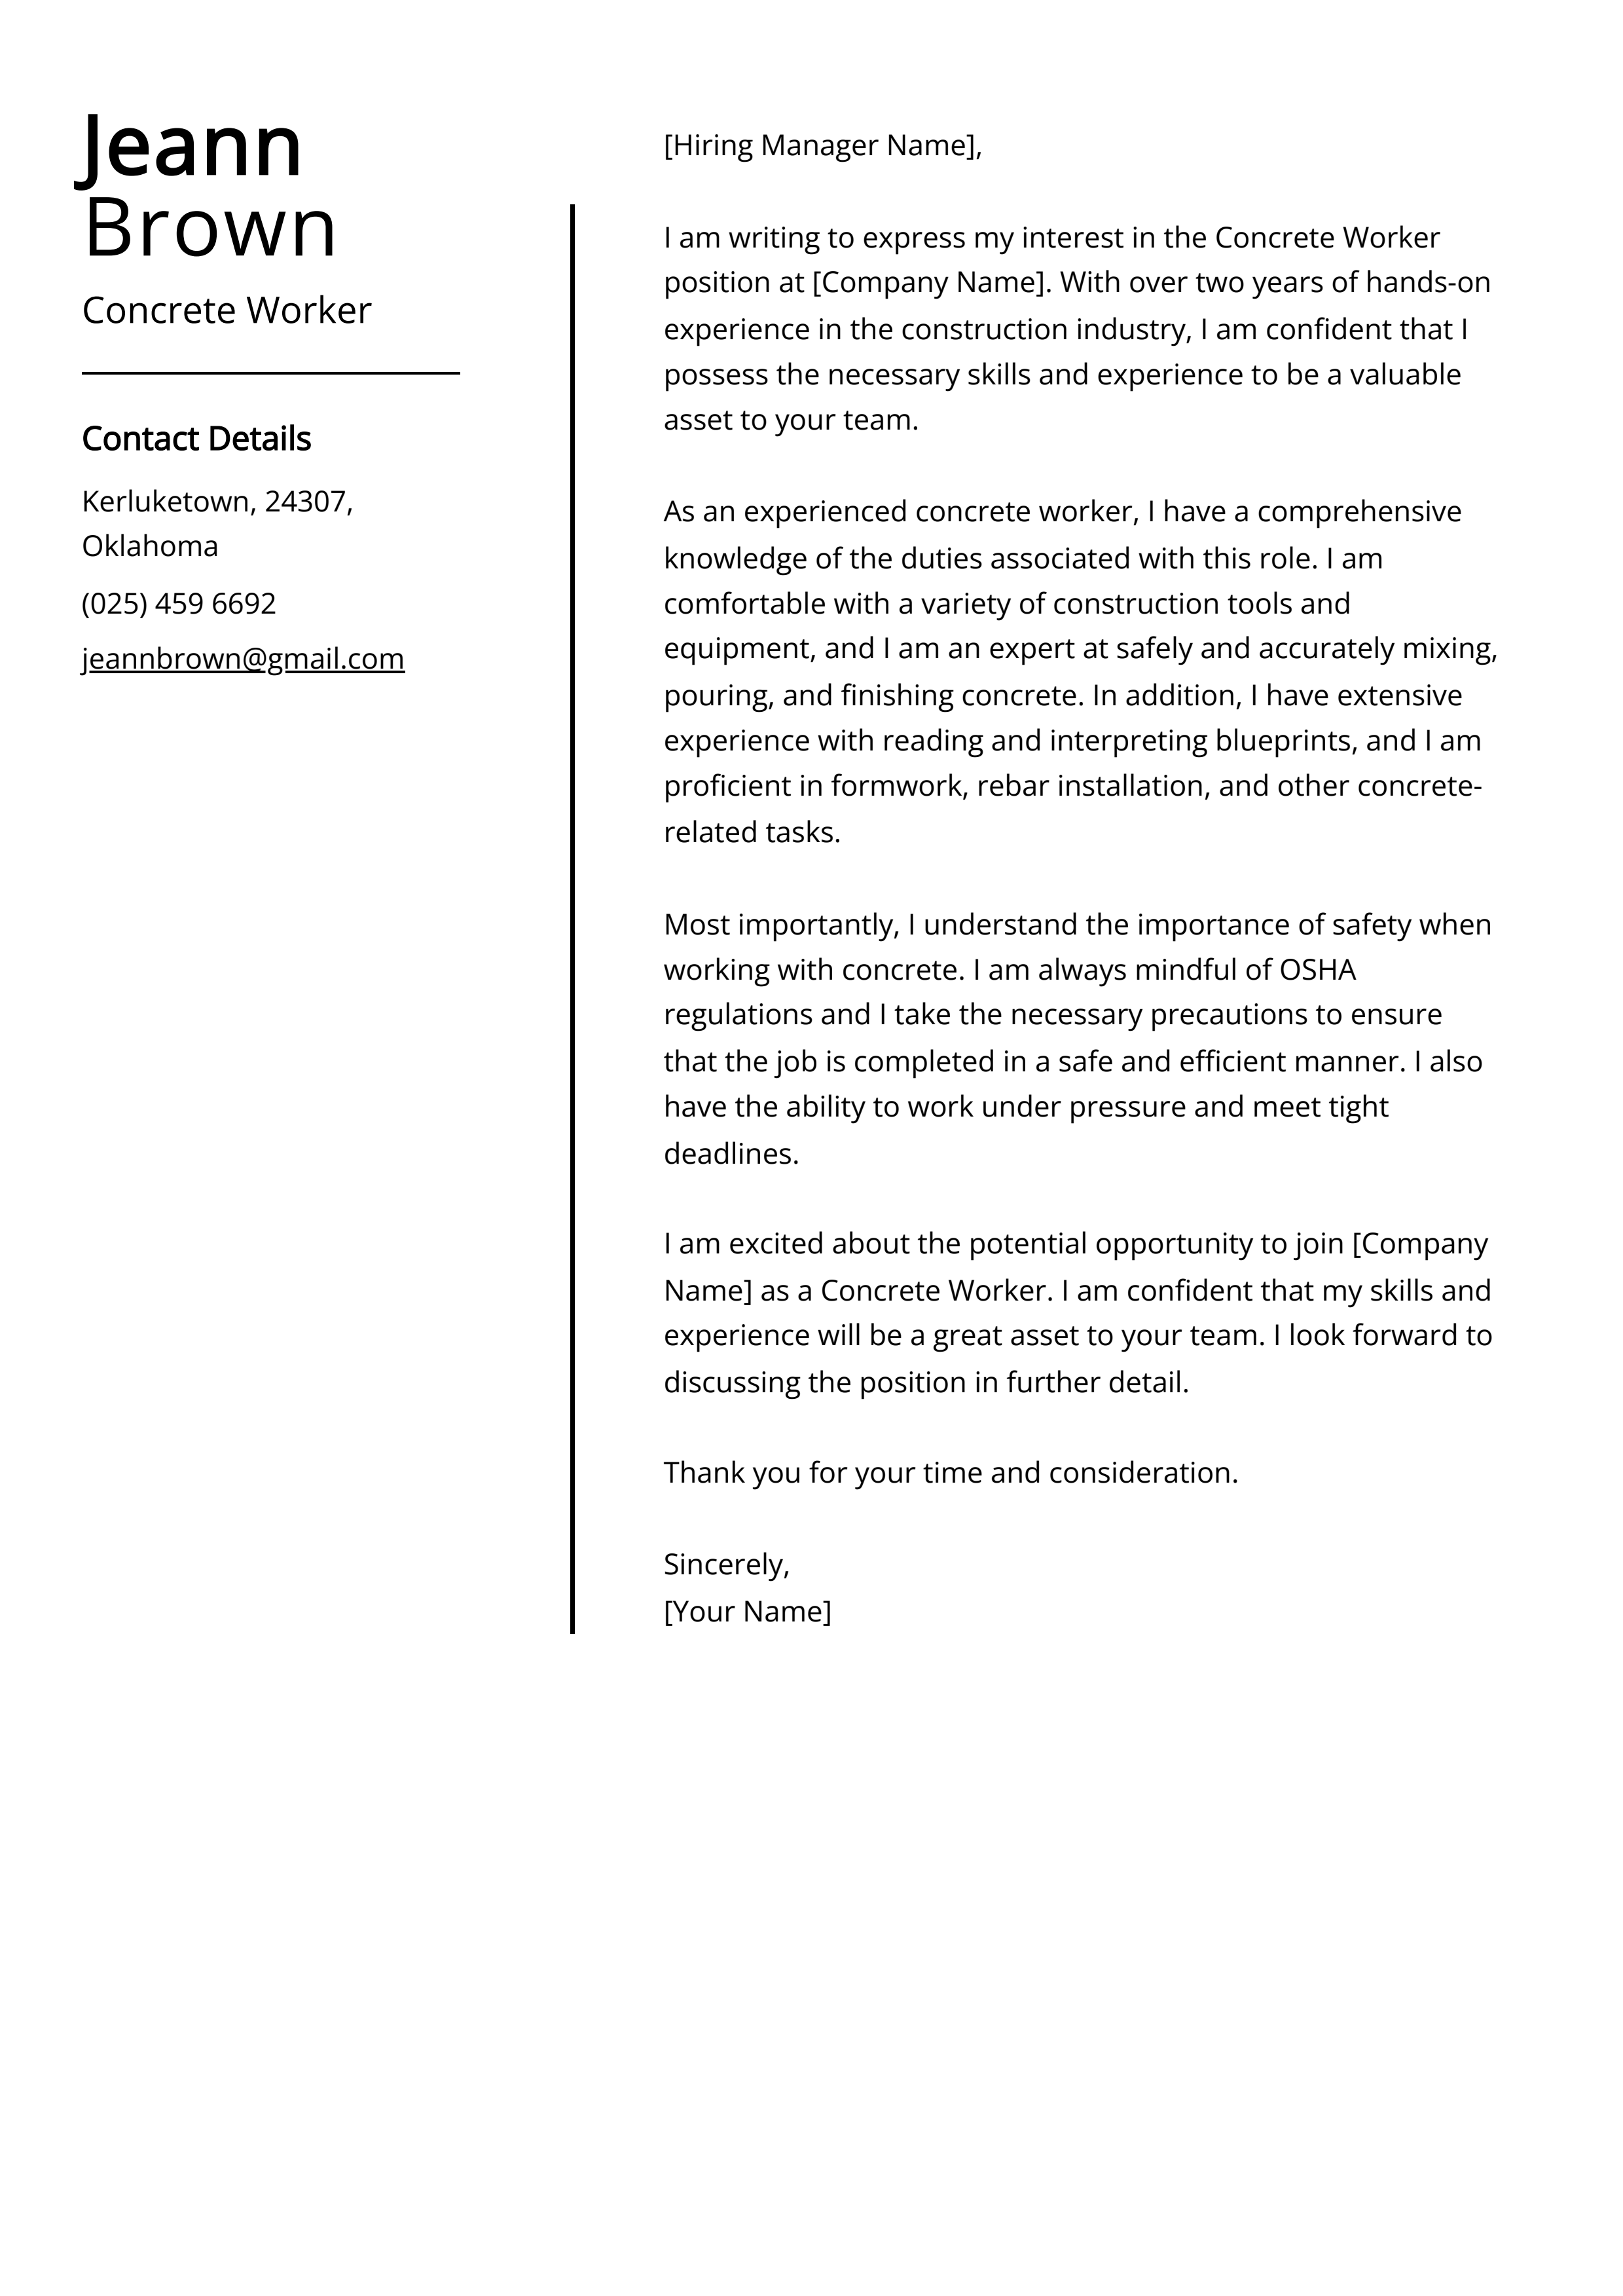 Concrete Worker Cover Letter Example